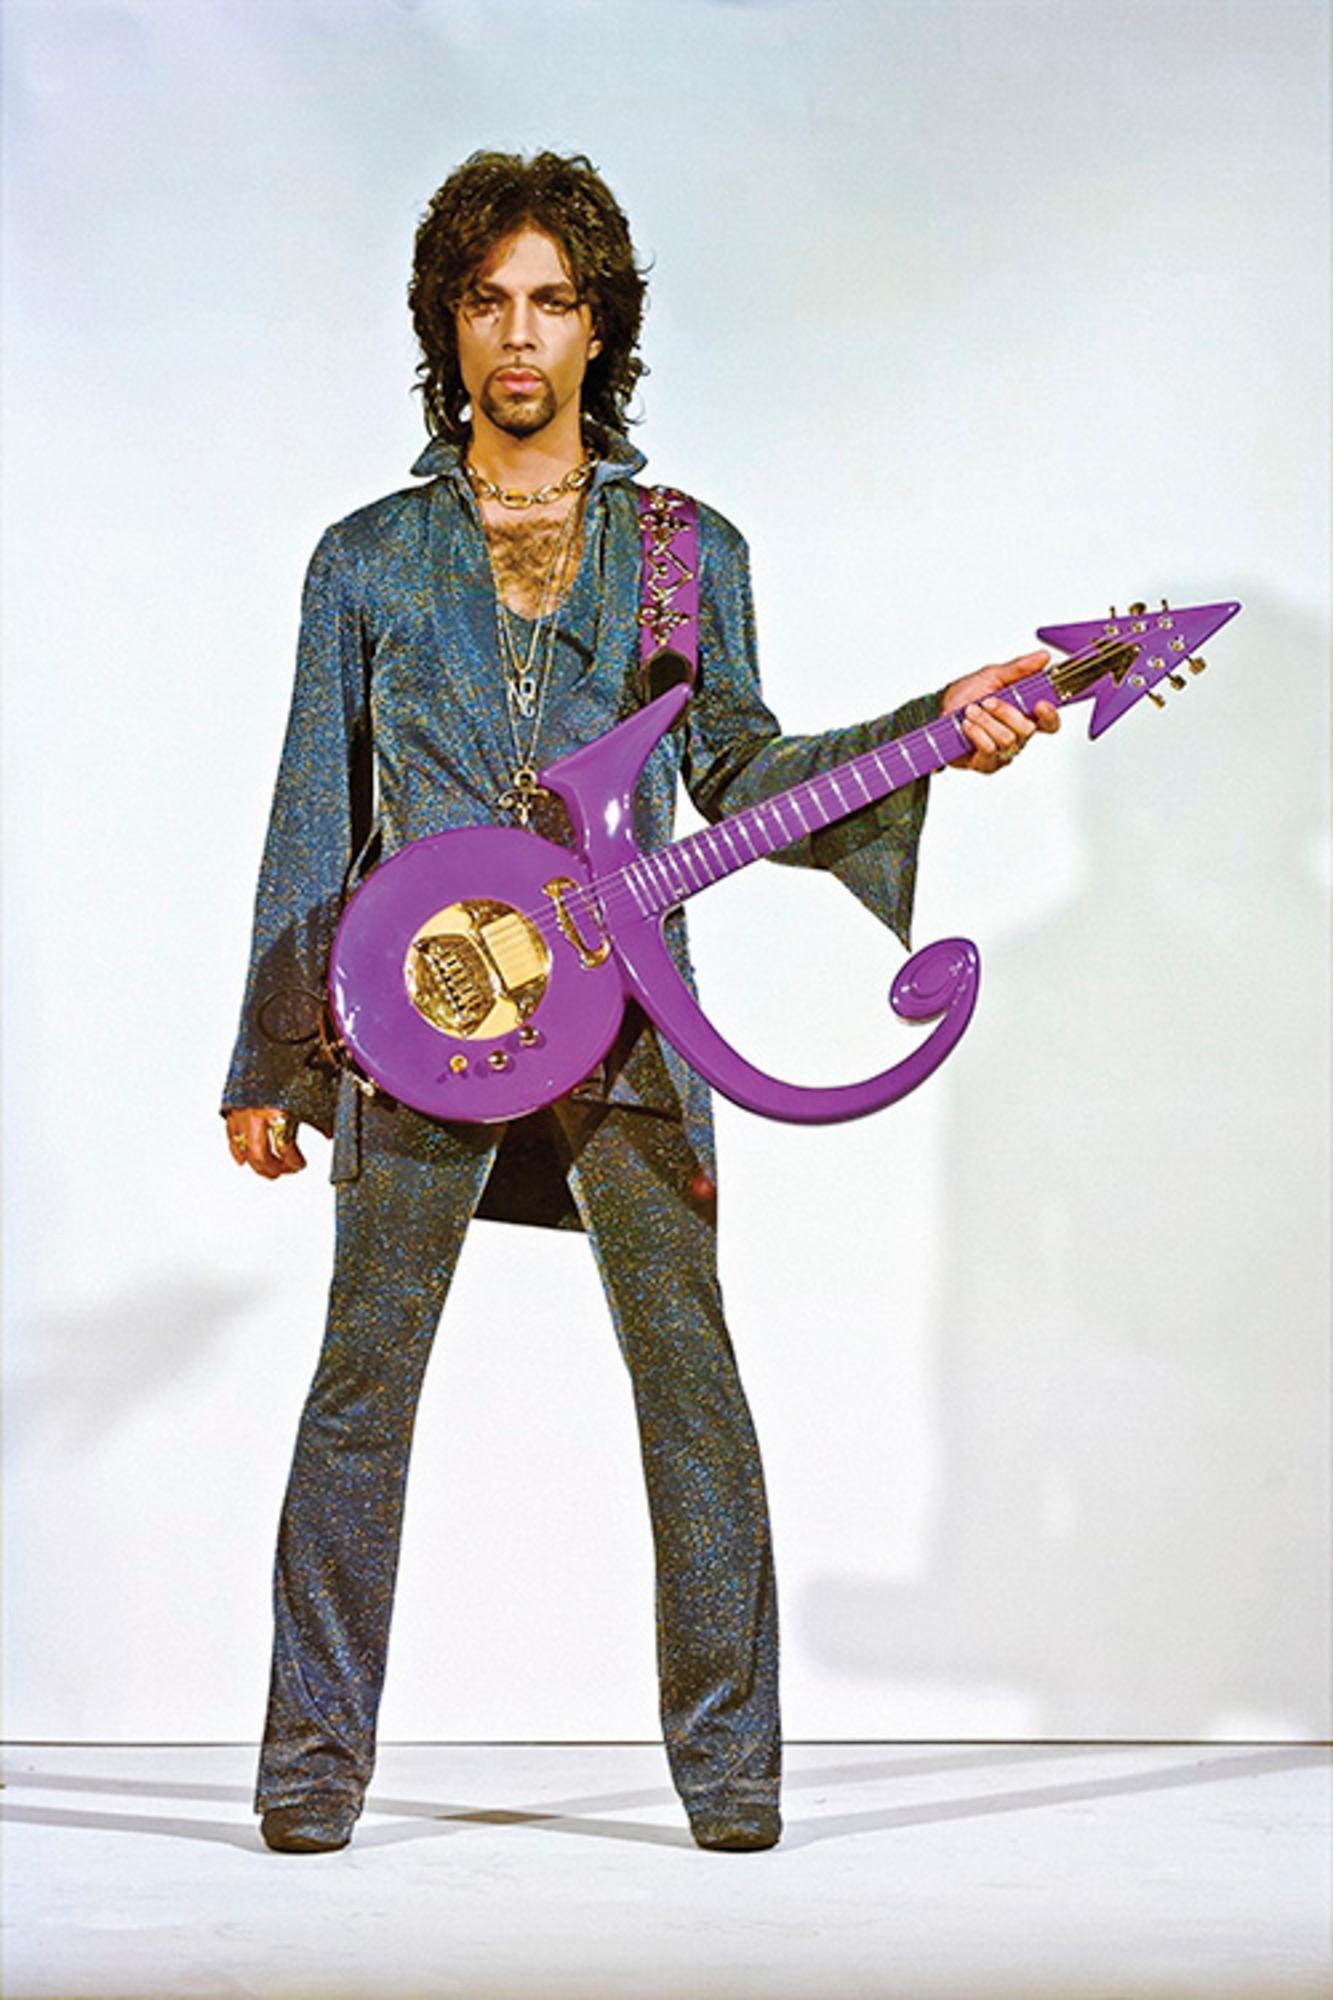 Title: Portrait of Prince with Schecter Purple Symbol Electric Guitar

Portrait of American singer-songwriter, multi-instrumentalist and record producer, Prince.

Available sizes: 
16”x12” Edition of 25
20”x16" Edition of 25
24”x20" Edition of